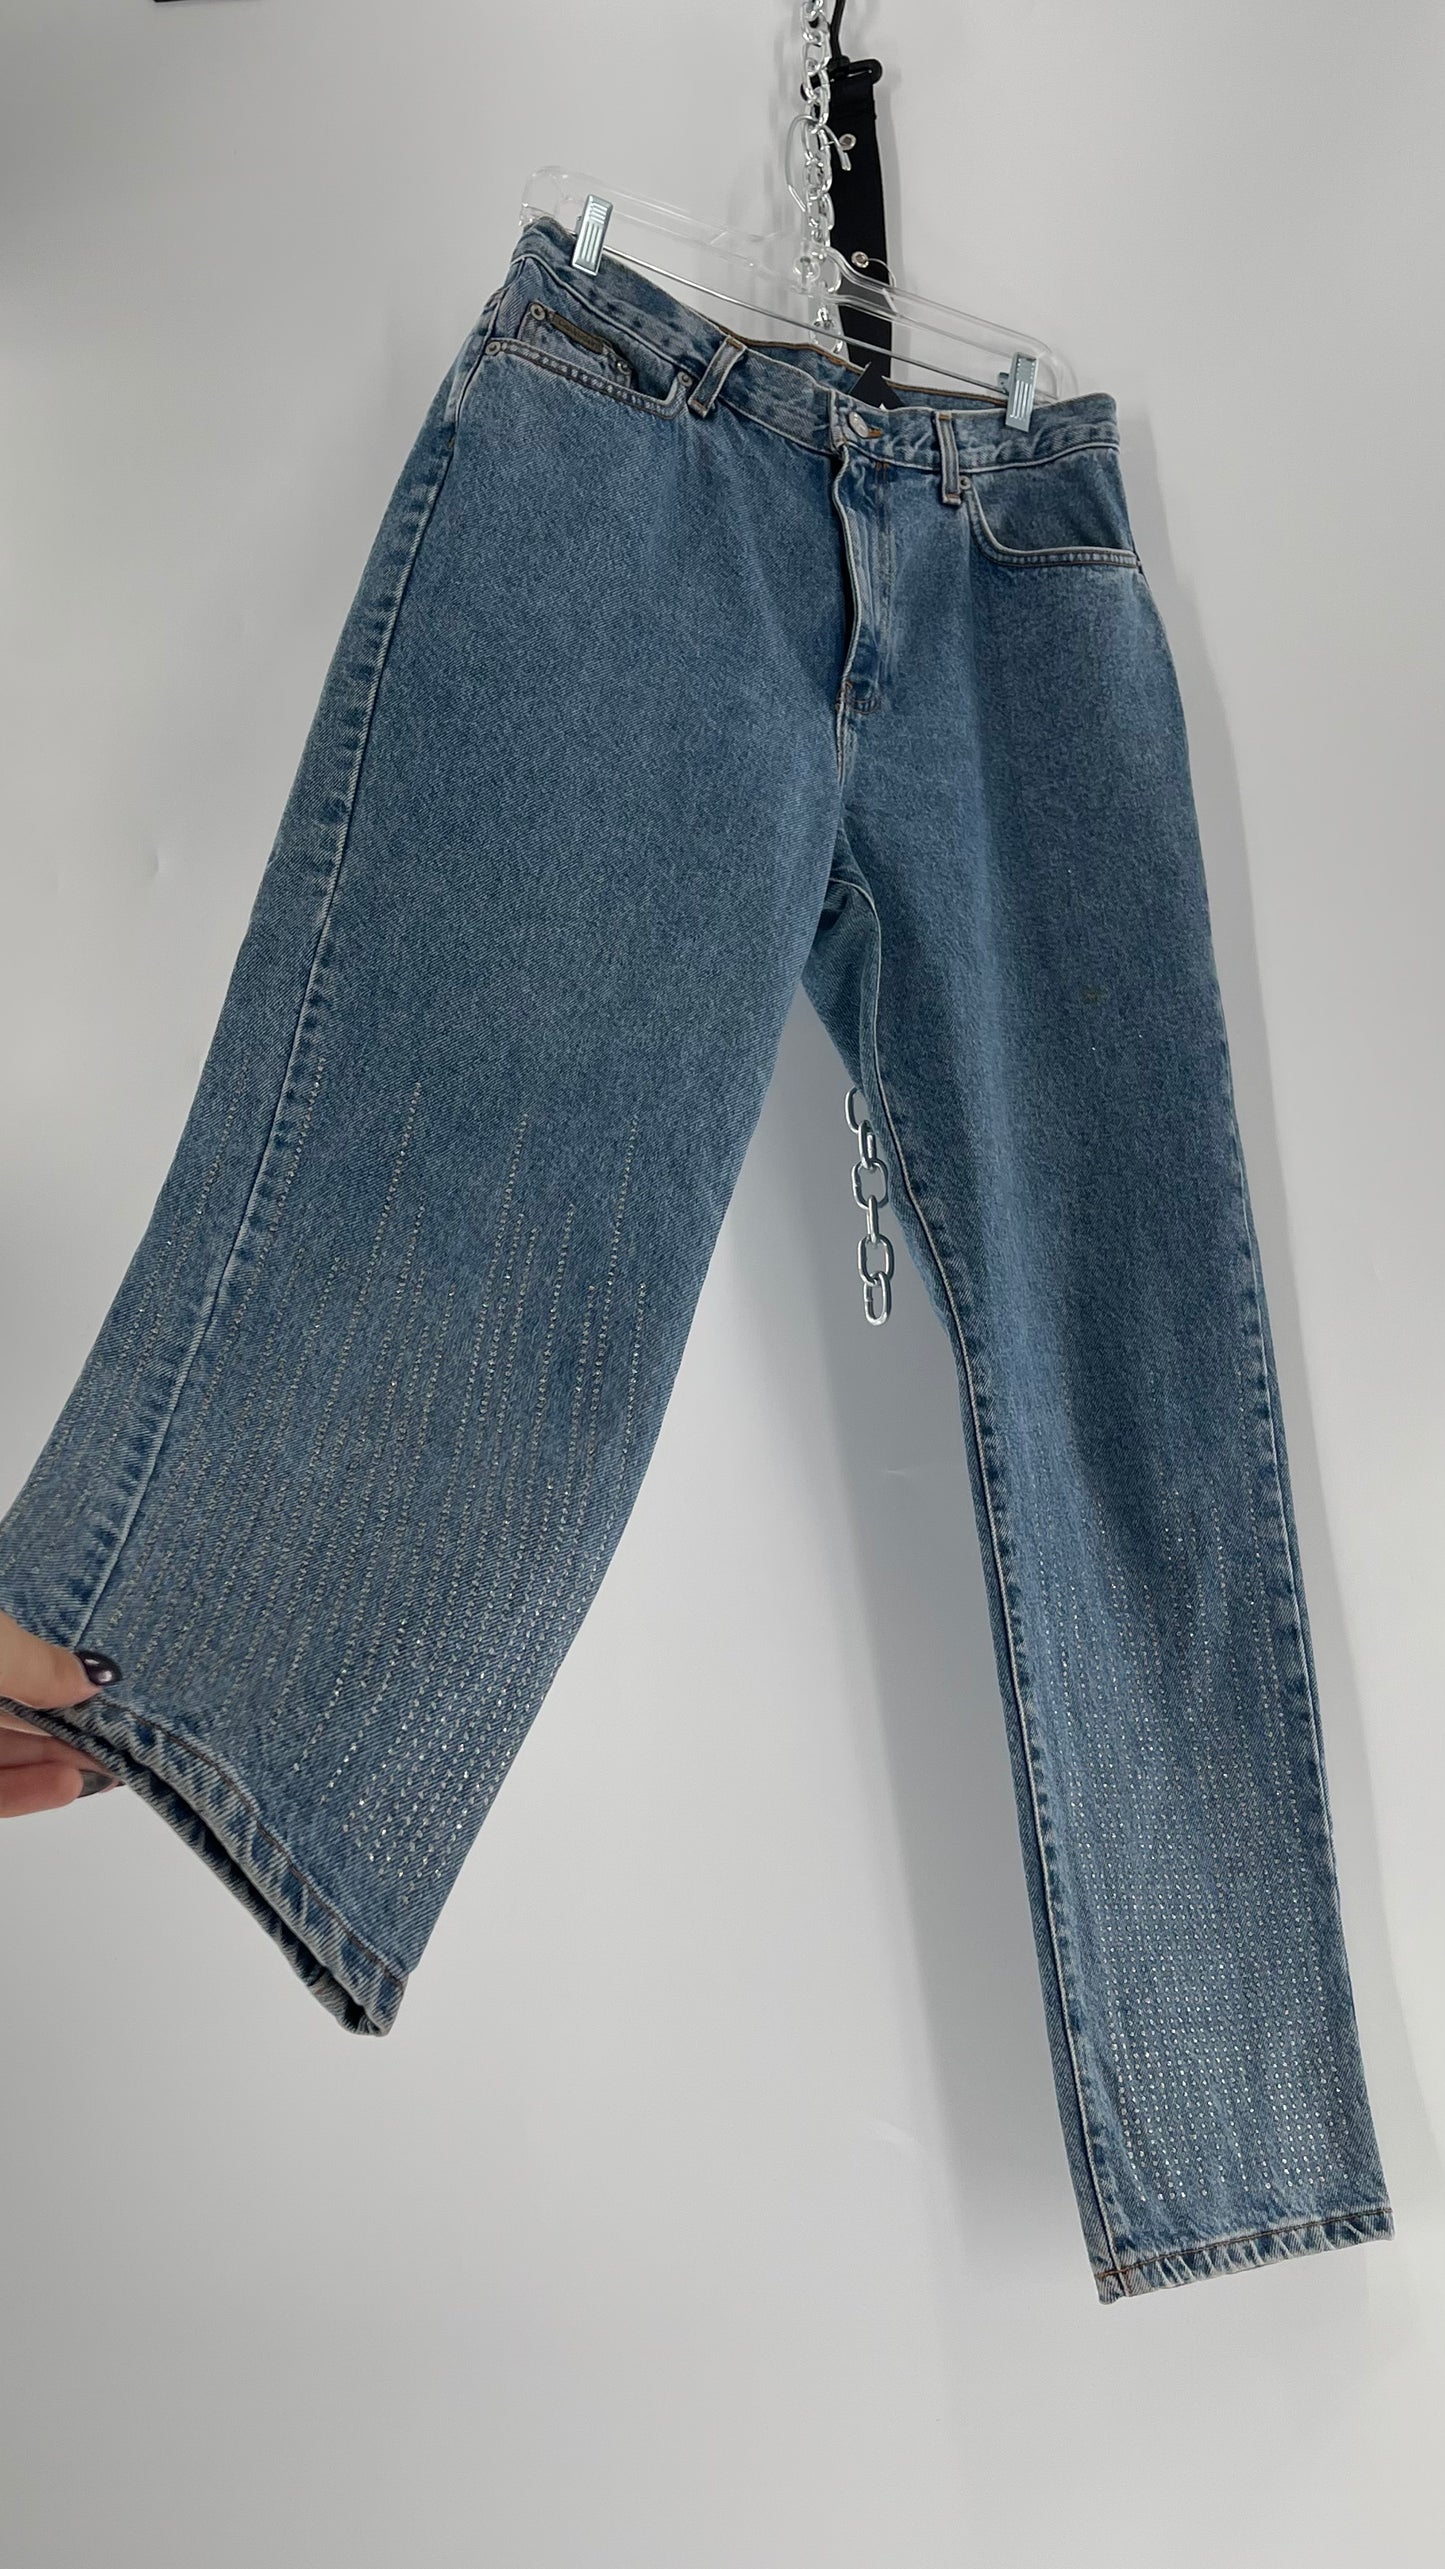 Vintage Calvin Klein Stone Washed Jeans with Silver Glitter Hem (29/30)